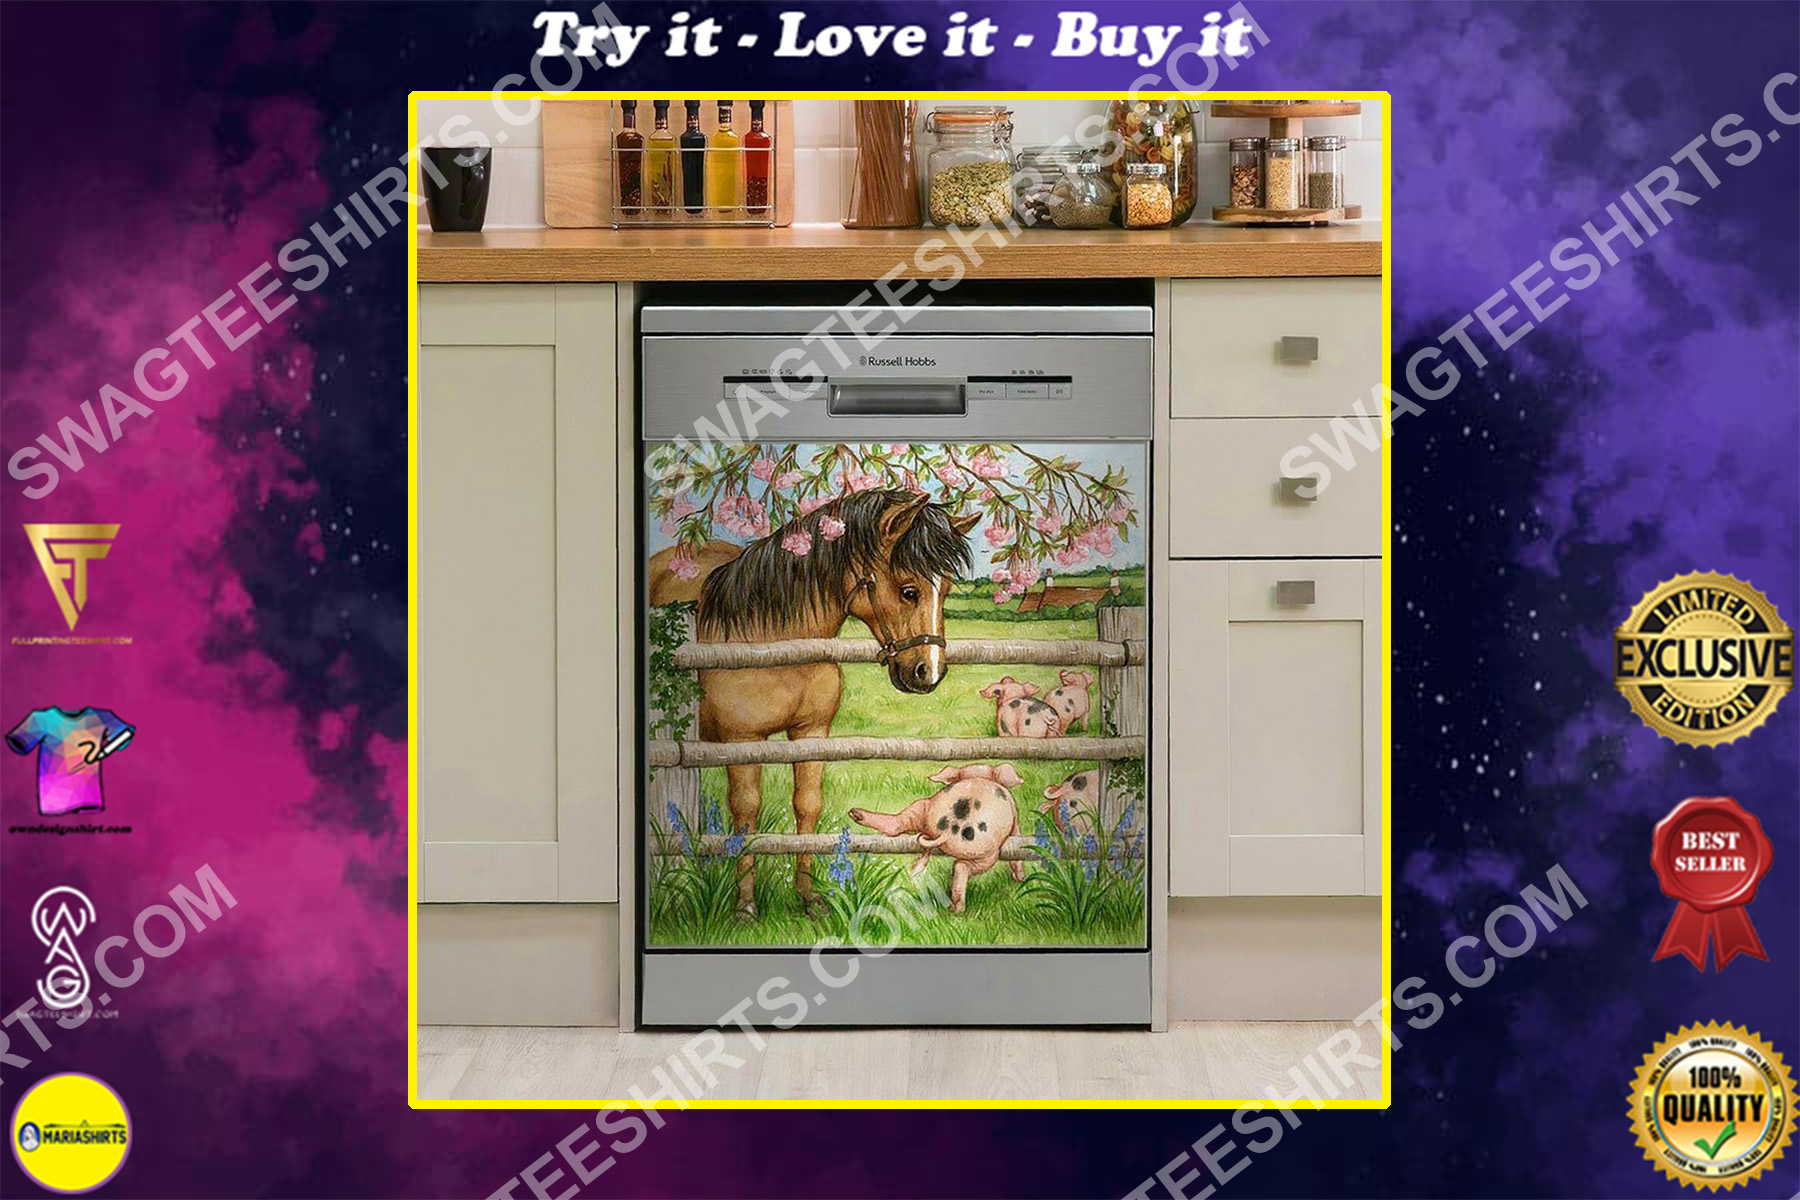 horse and pig farm life floral kitchen decorative dishwasher magnet cover